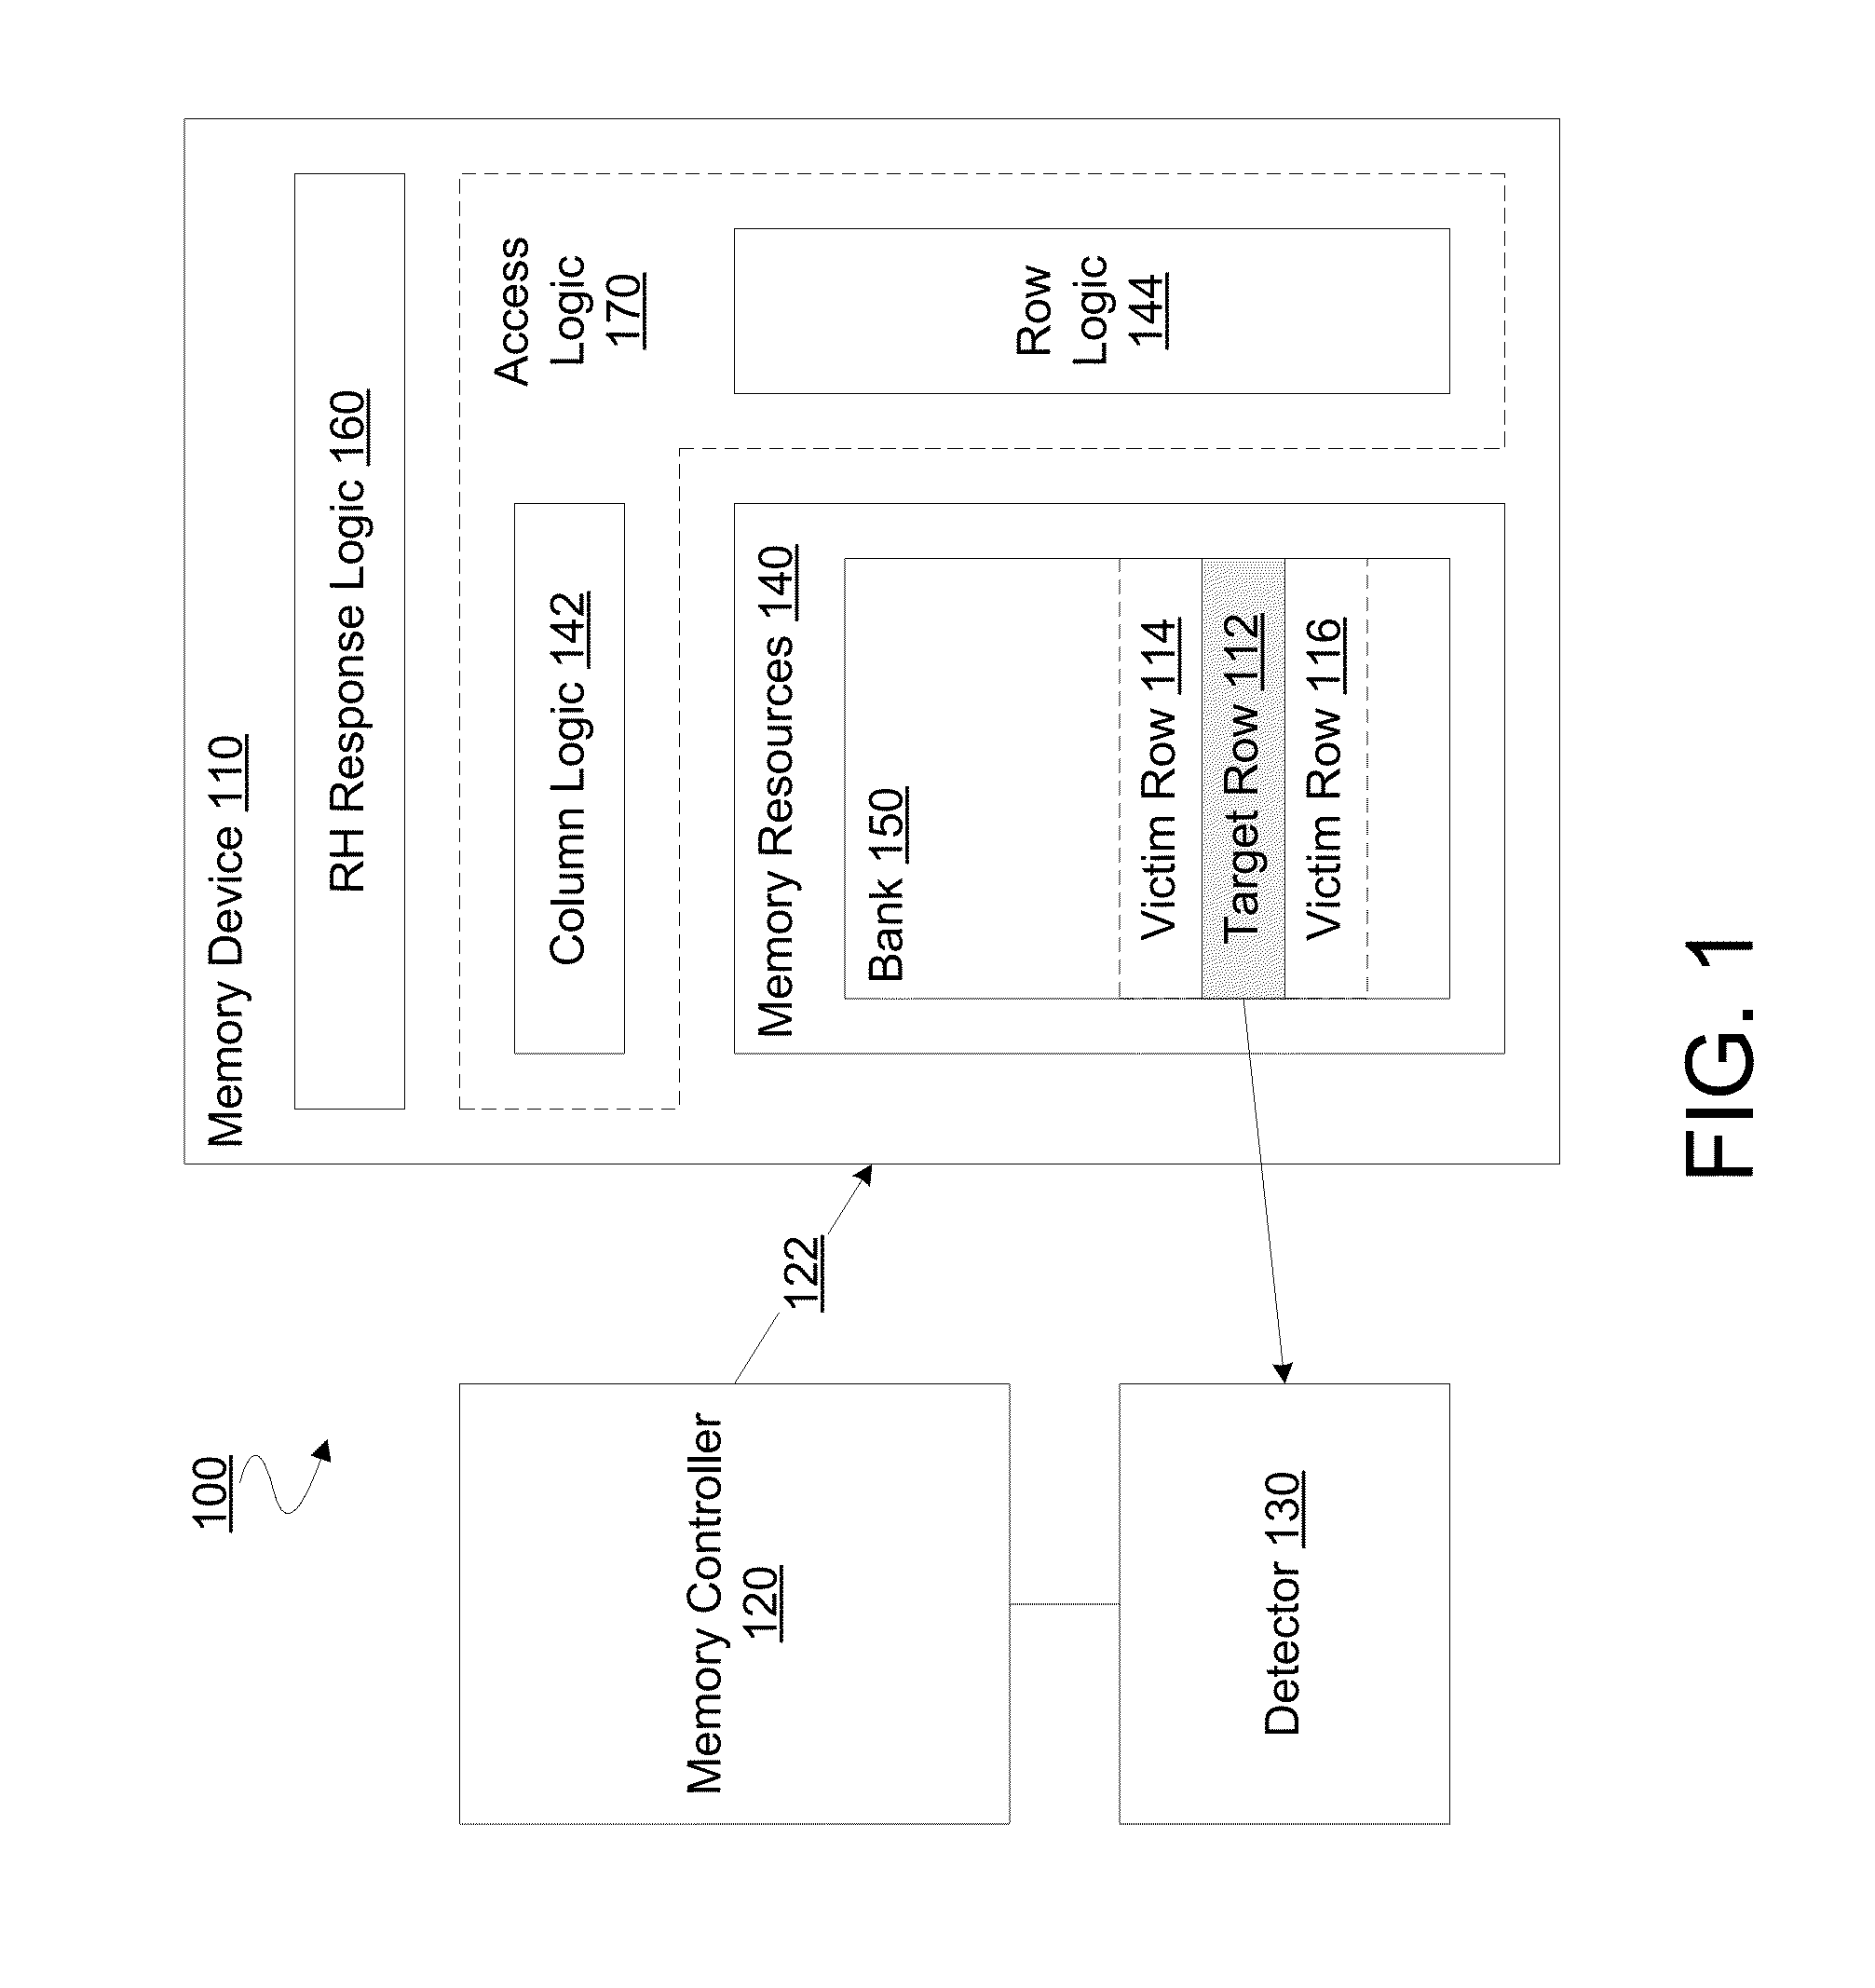 Method, apparatus and system for responding to a row hammer event